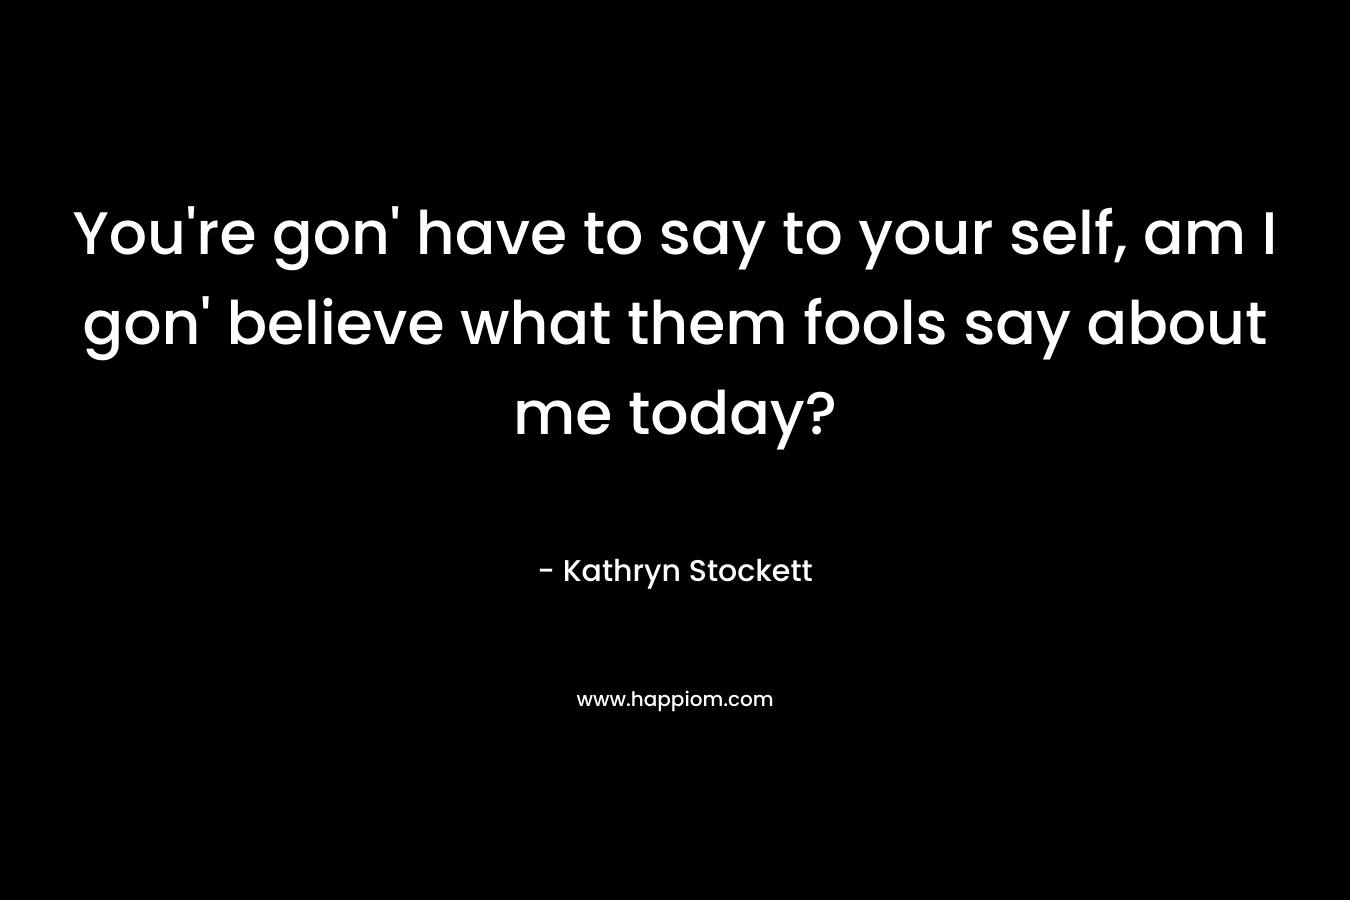 You’re gon’ have to say to your self, am I gon’ believe what them fools say about me today? – Kathryn Stockett